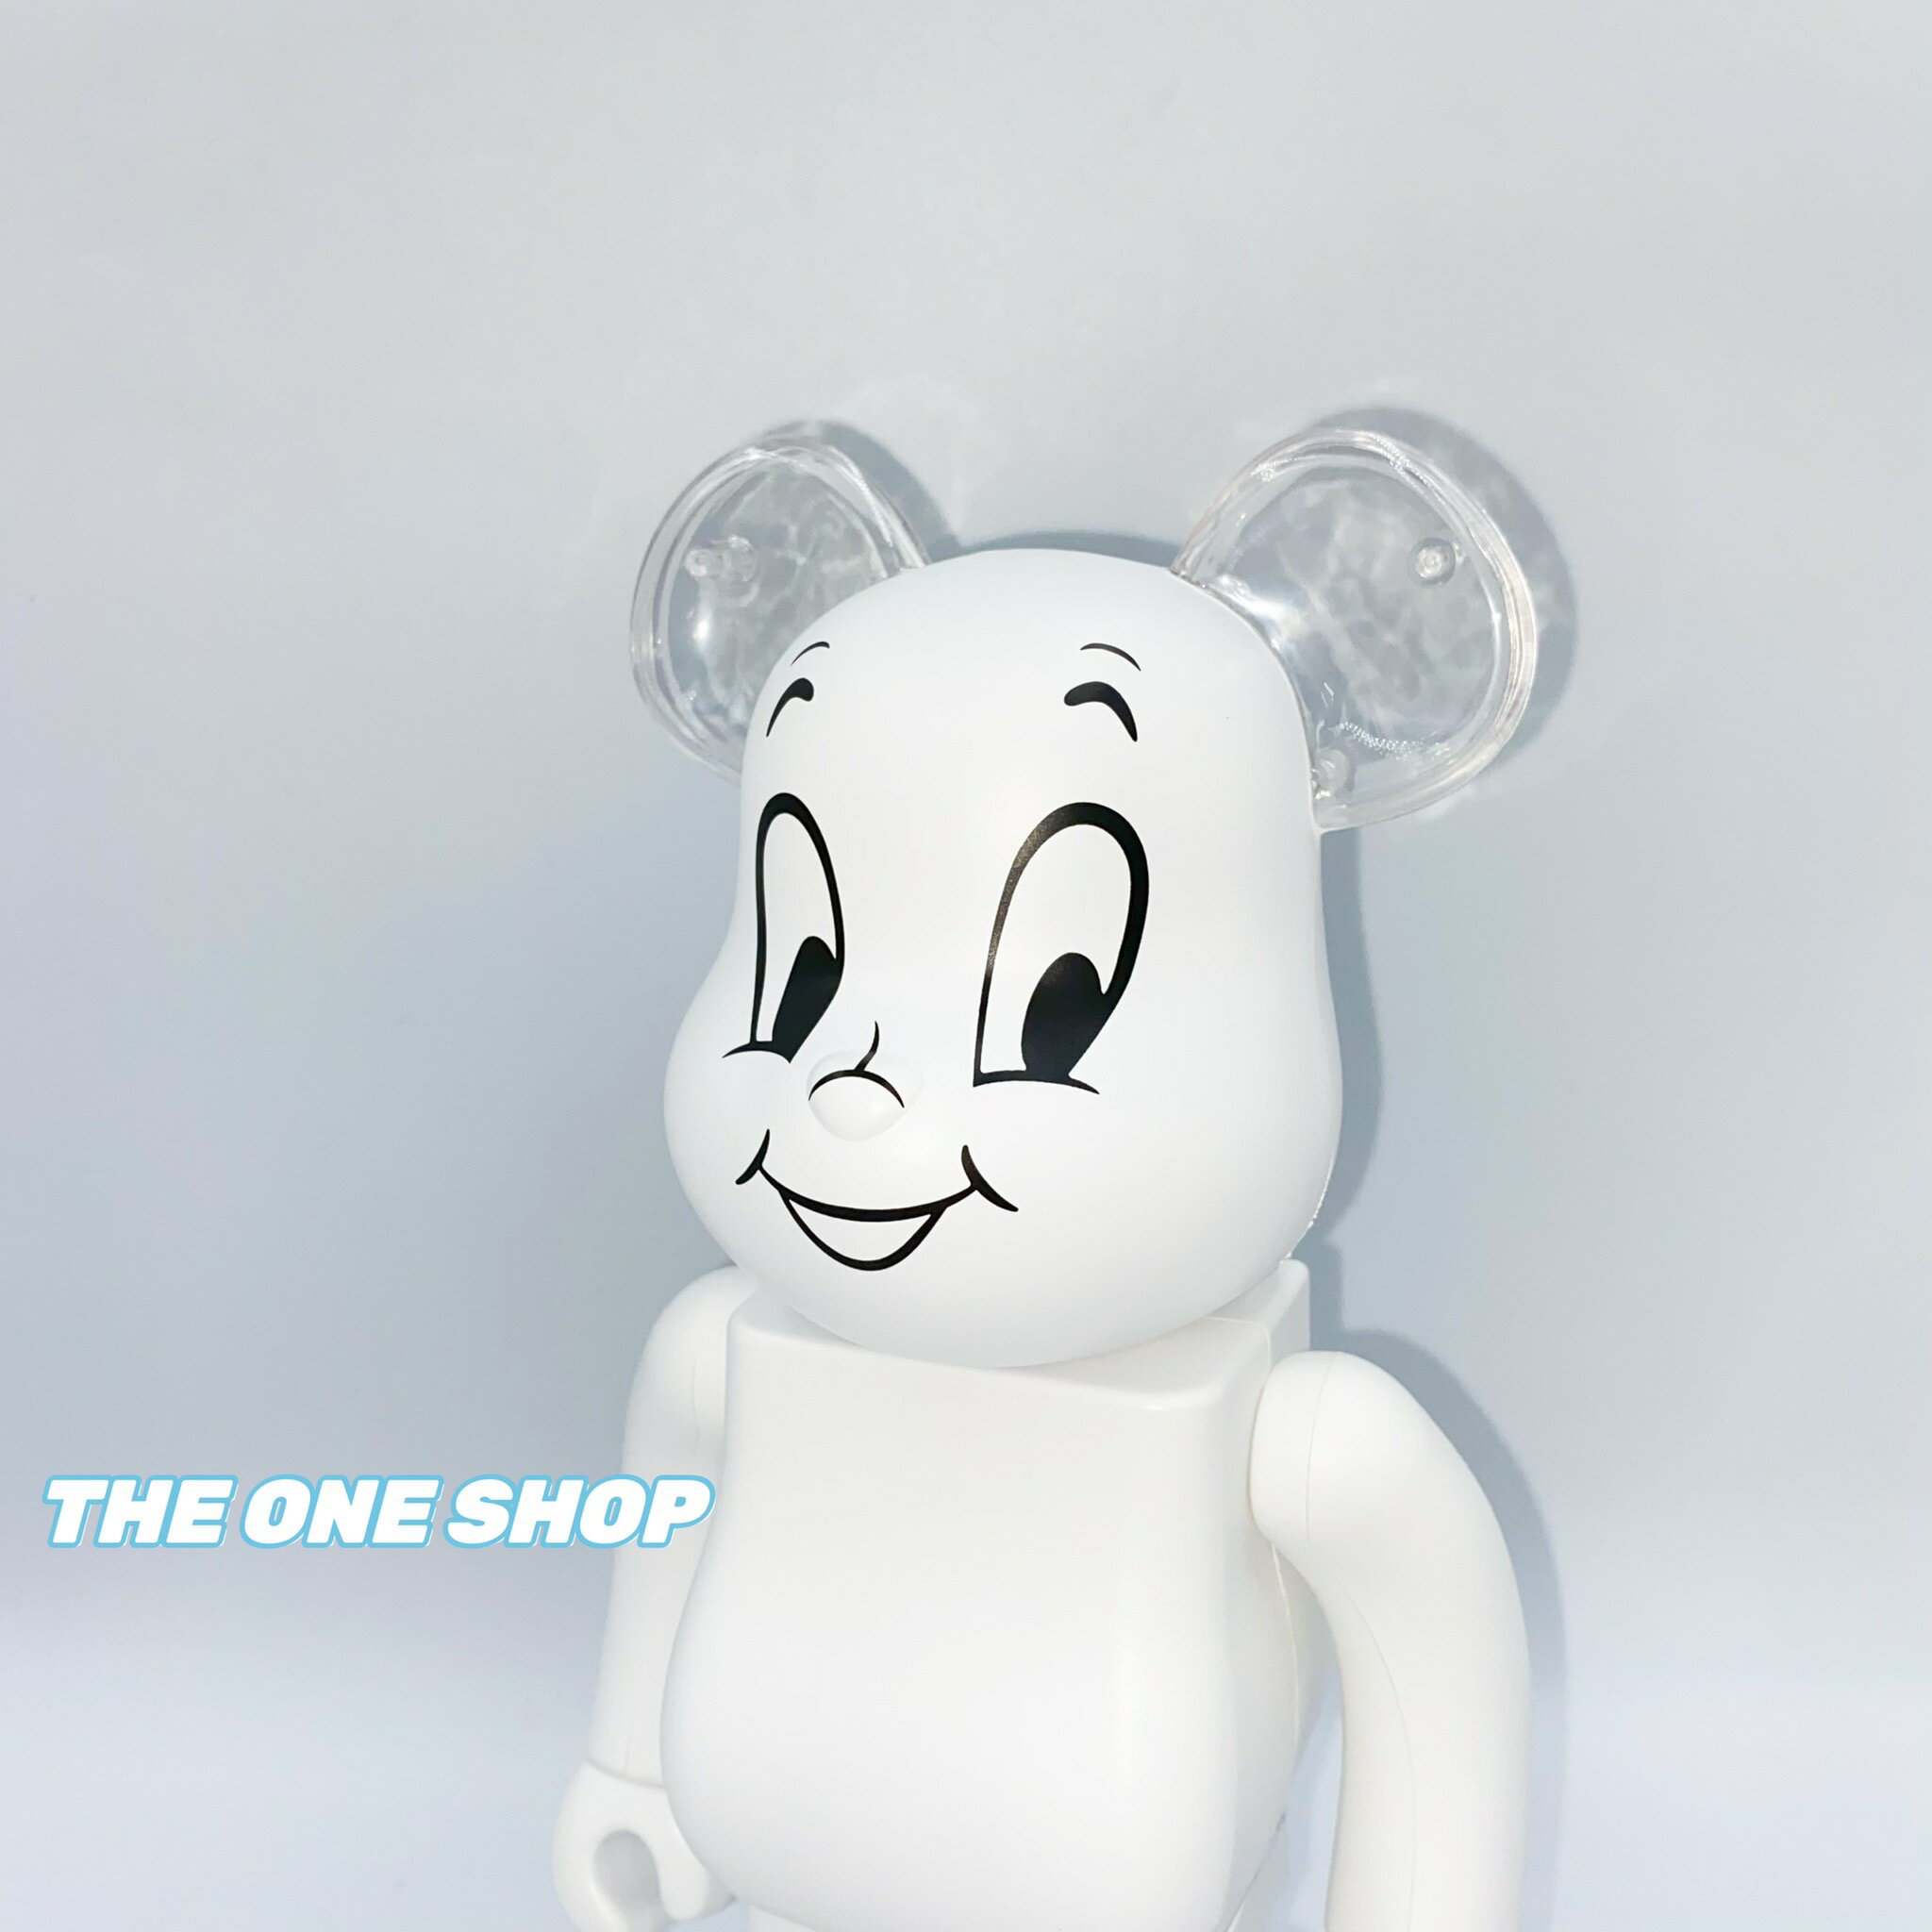 TheOneShop BE@RBRICK Casper the Friendly Ghost 鬼馬小精靈庫柏力克